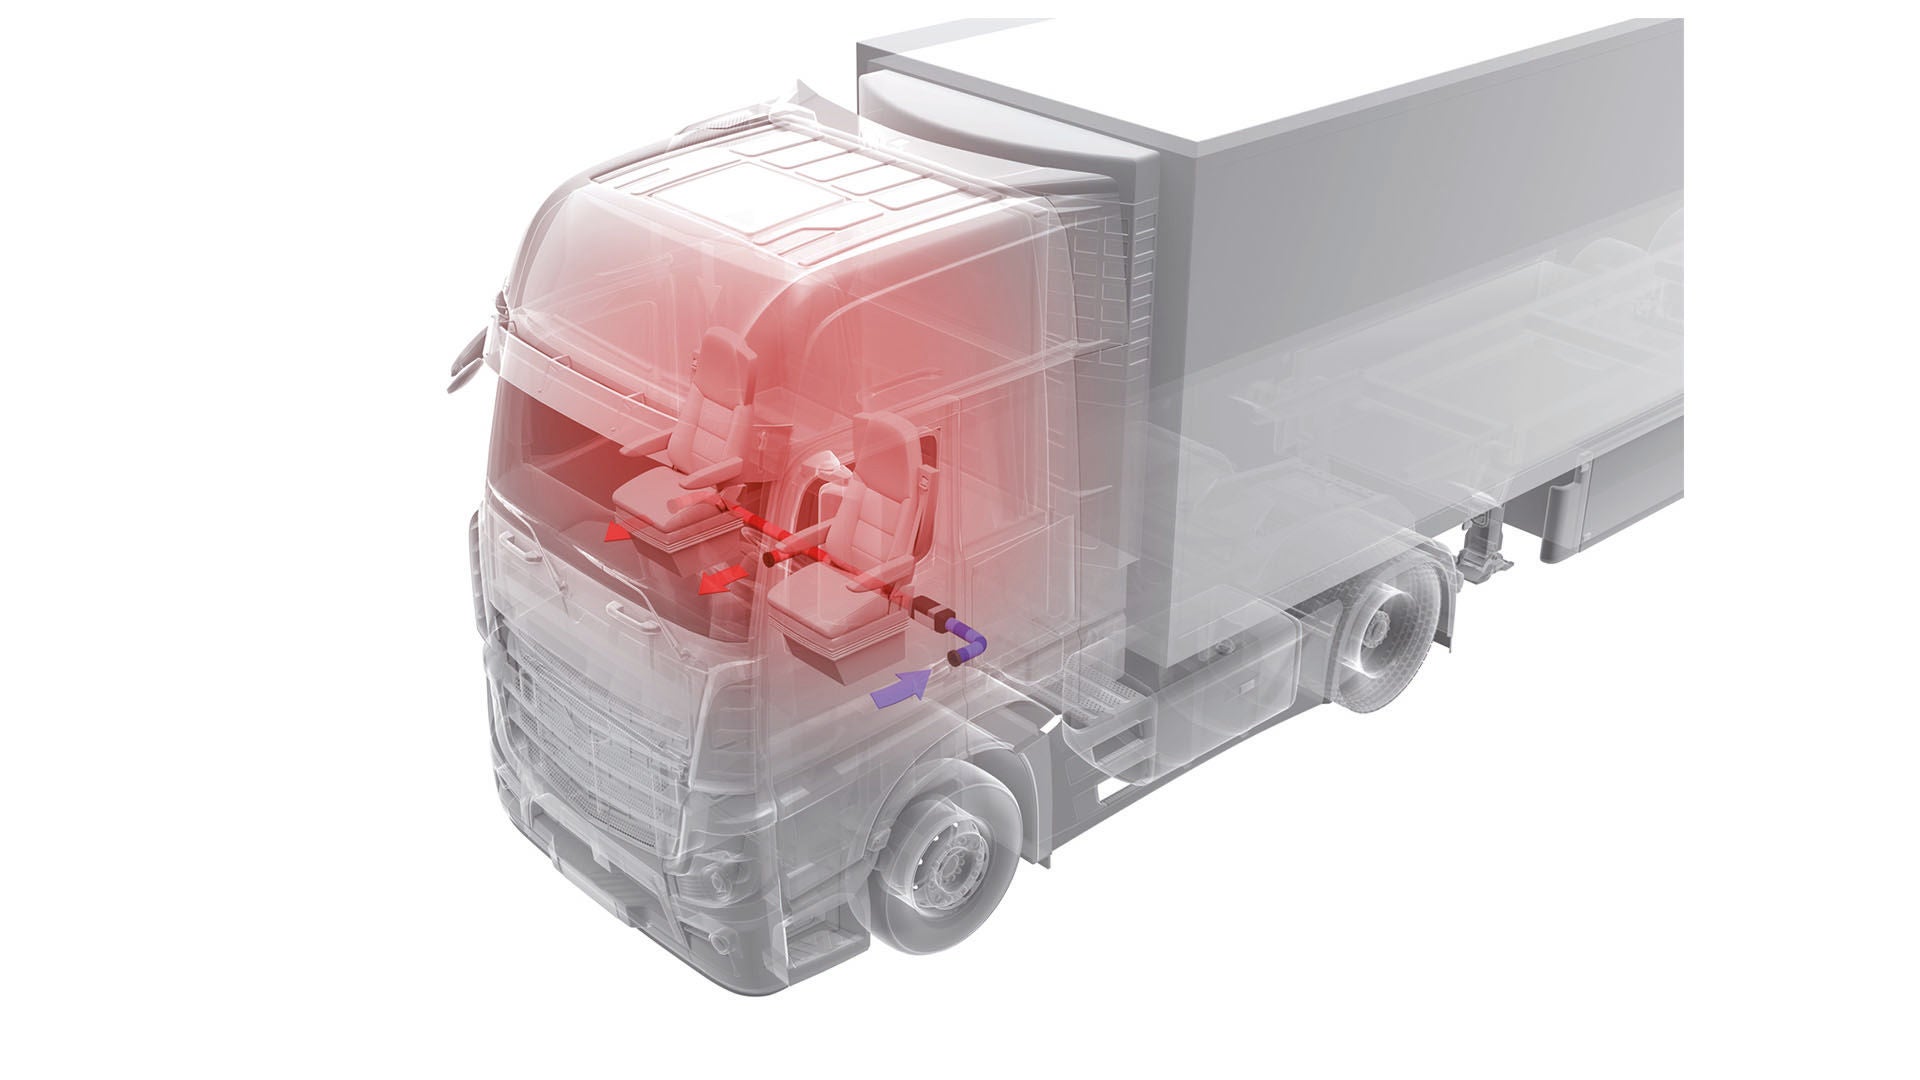 Illustration of a Webasto air heater in a truck